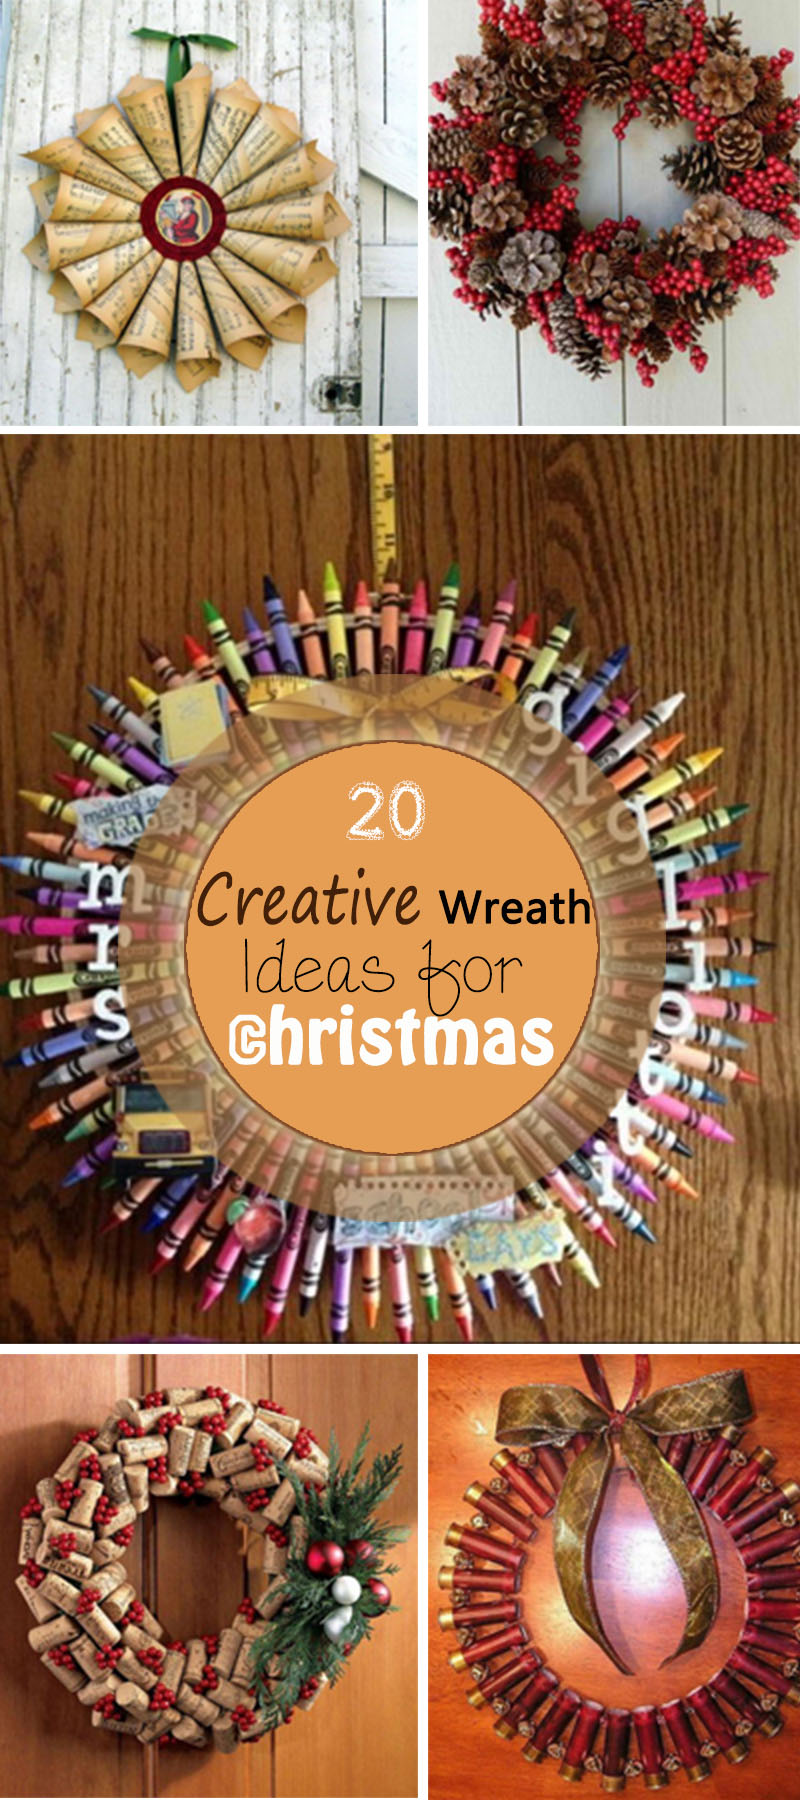 Lots of Creative Wreath Ideas for Christmas!